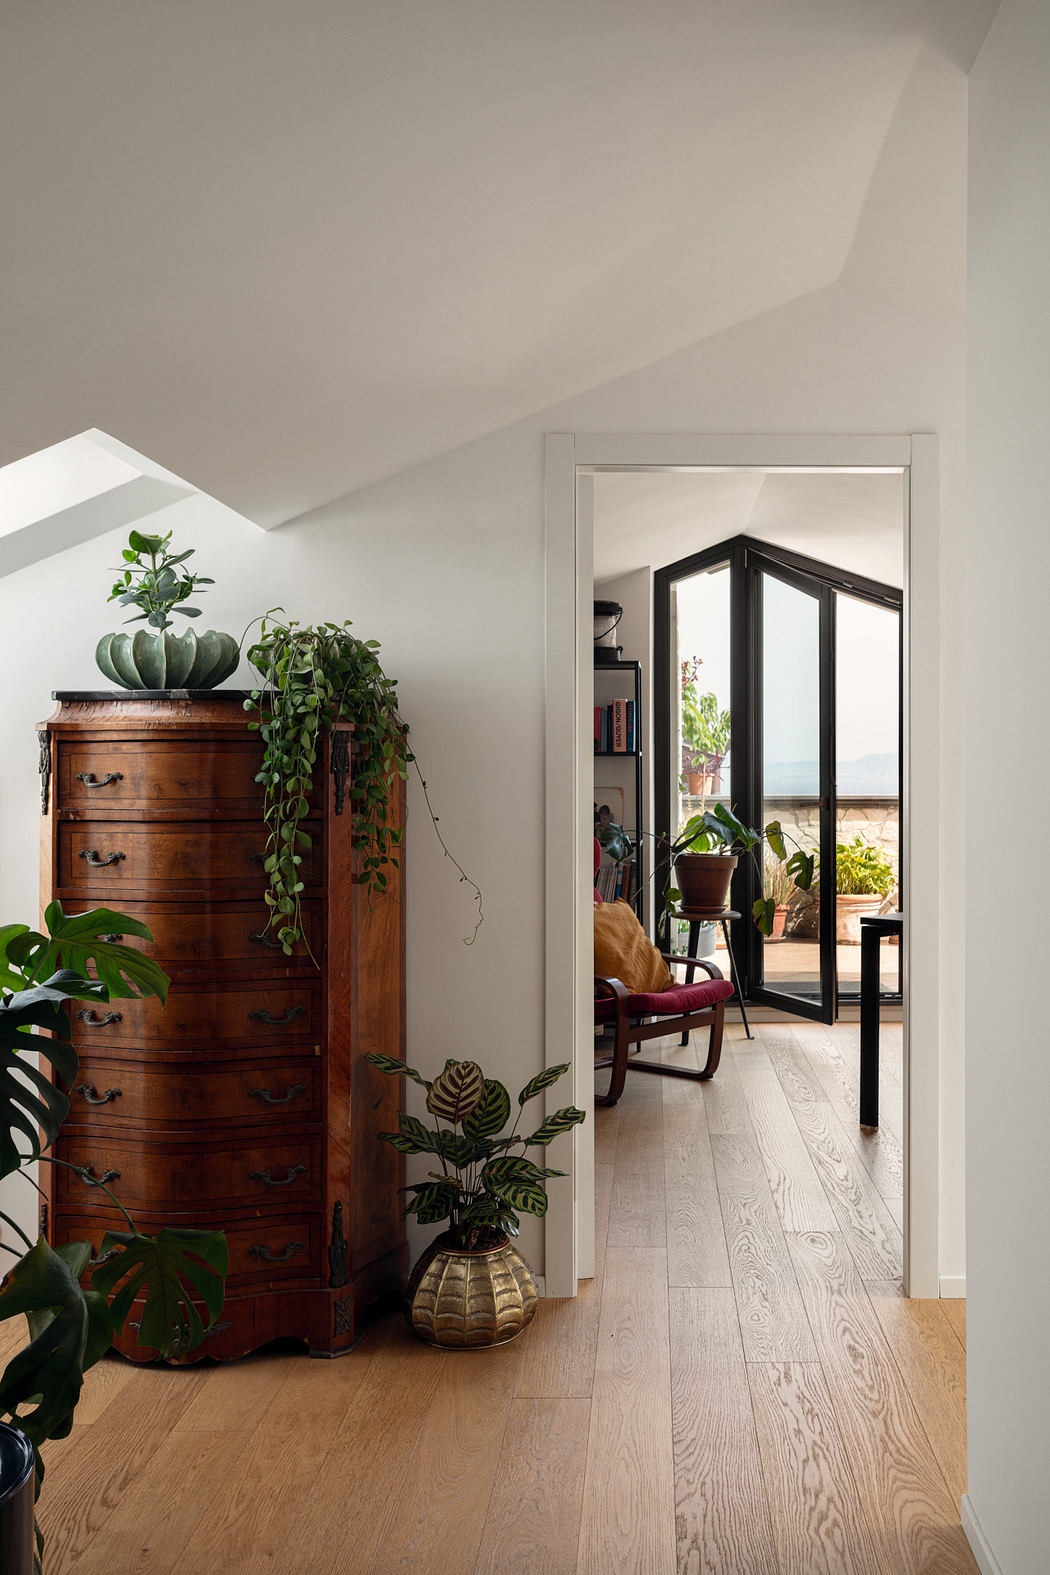 Modern interior corridor with wooden floors and potted plants.